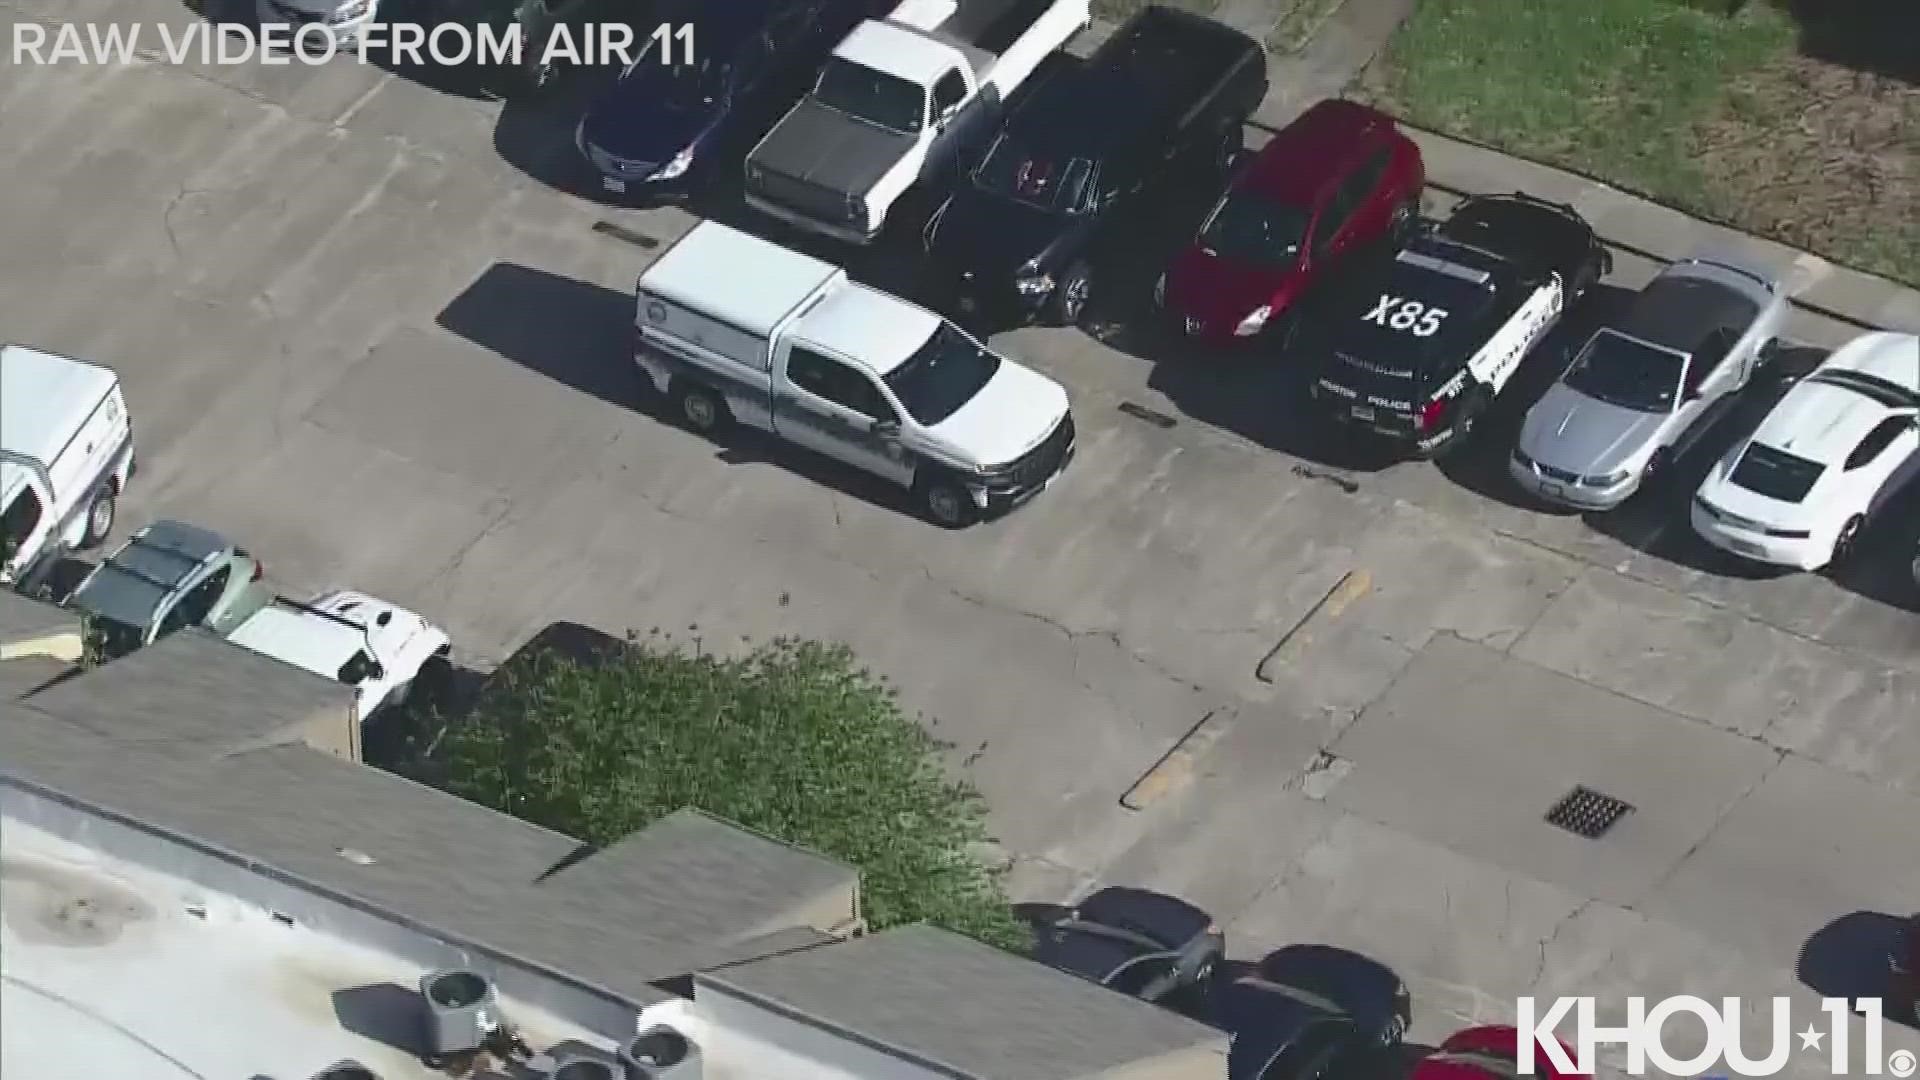 A woman was shot multiple times Wednesday at an apartment complex in west Houston, according to police.